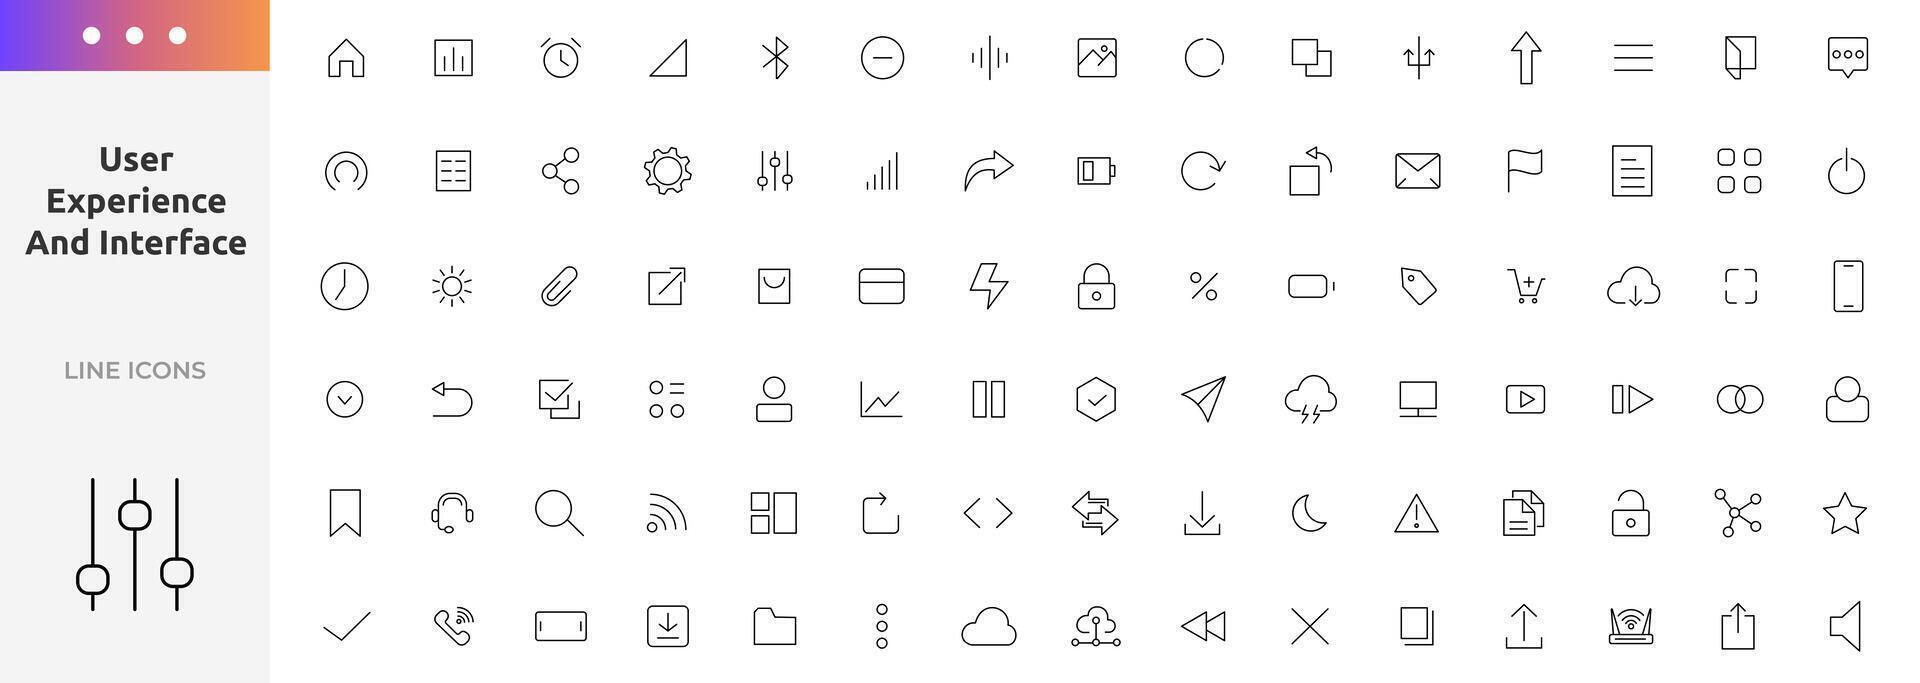 User experience and interface icon set. UI flat icons collection.Basic User Interface Essential Set. Outline icon pack for App, Web, Print. Pixel perfect 64 x 64 vector